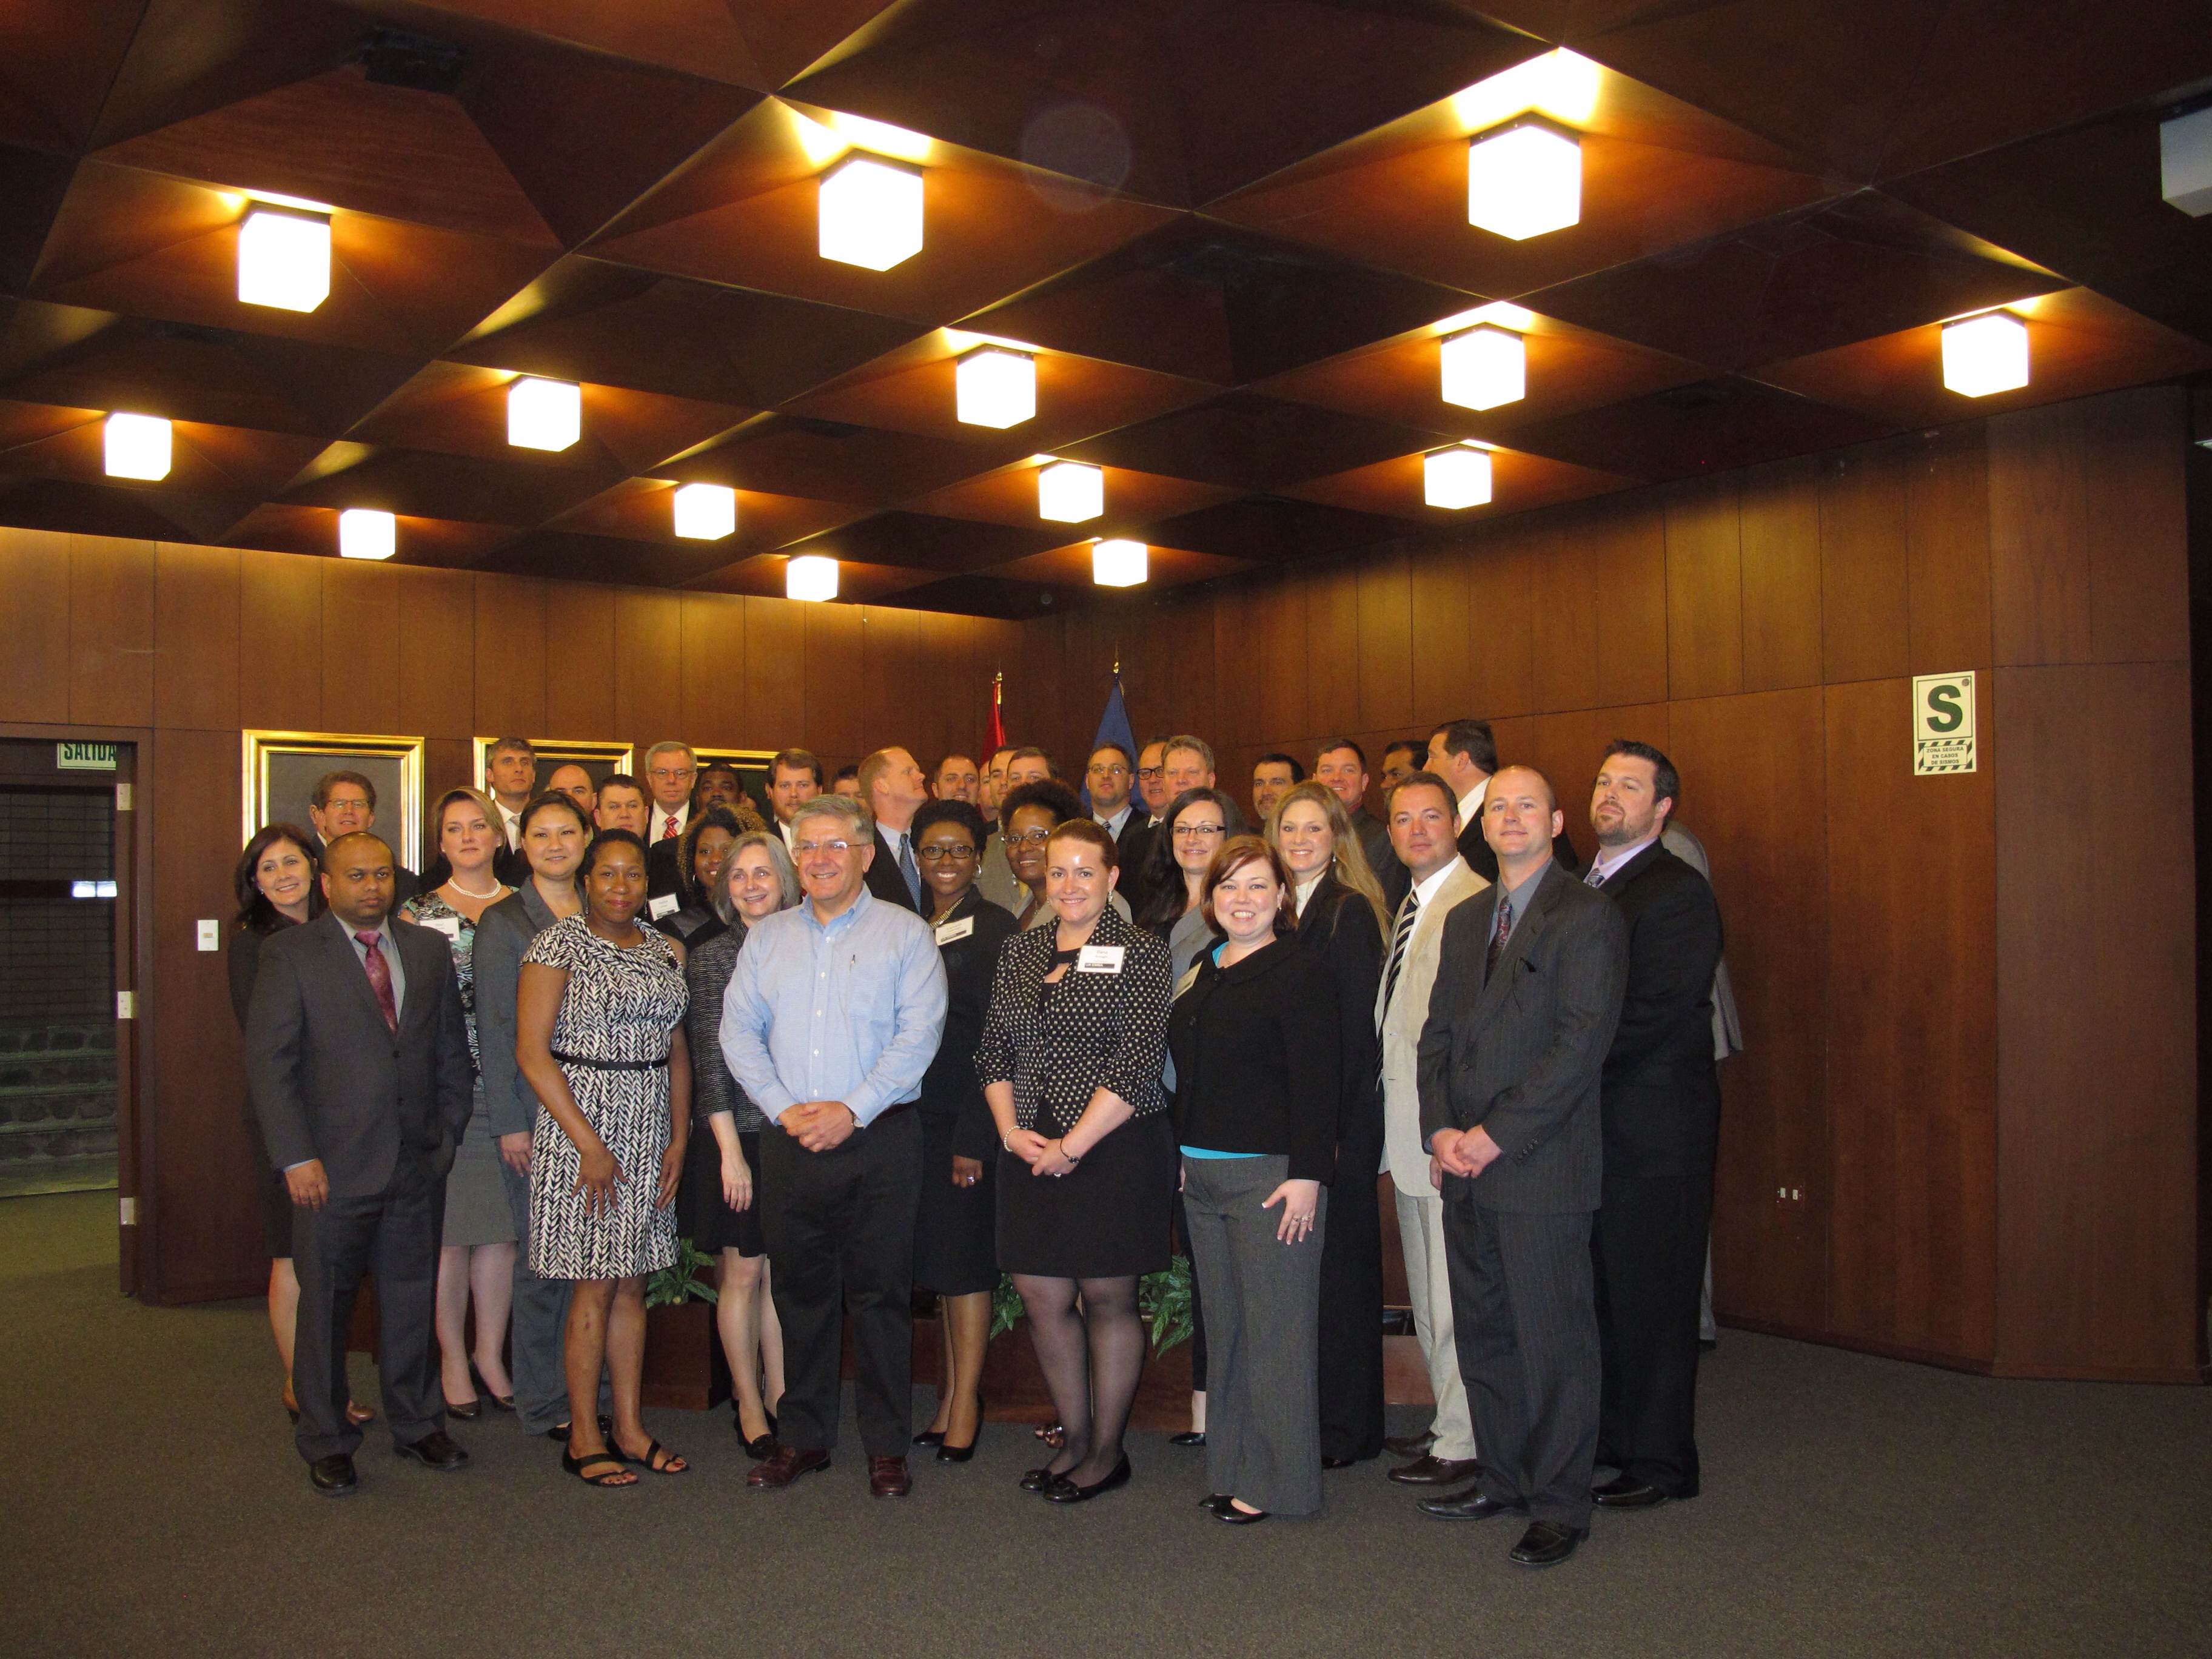 UA EMBA Class of 2014 with Renzo Rossini, General Manager of the Central Bank of Peru